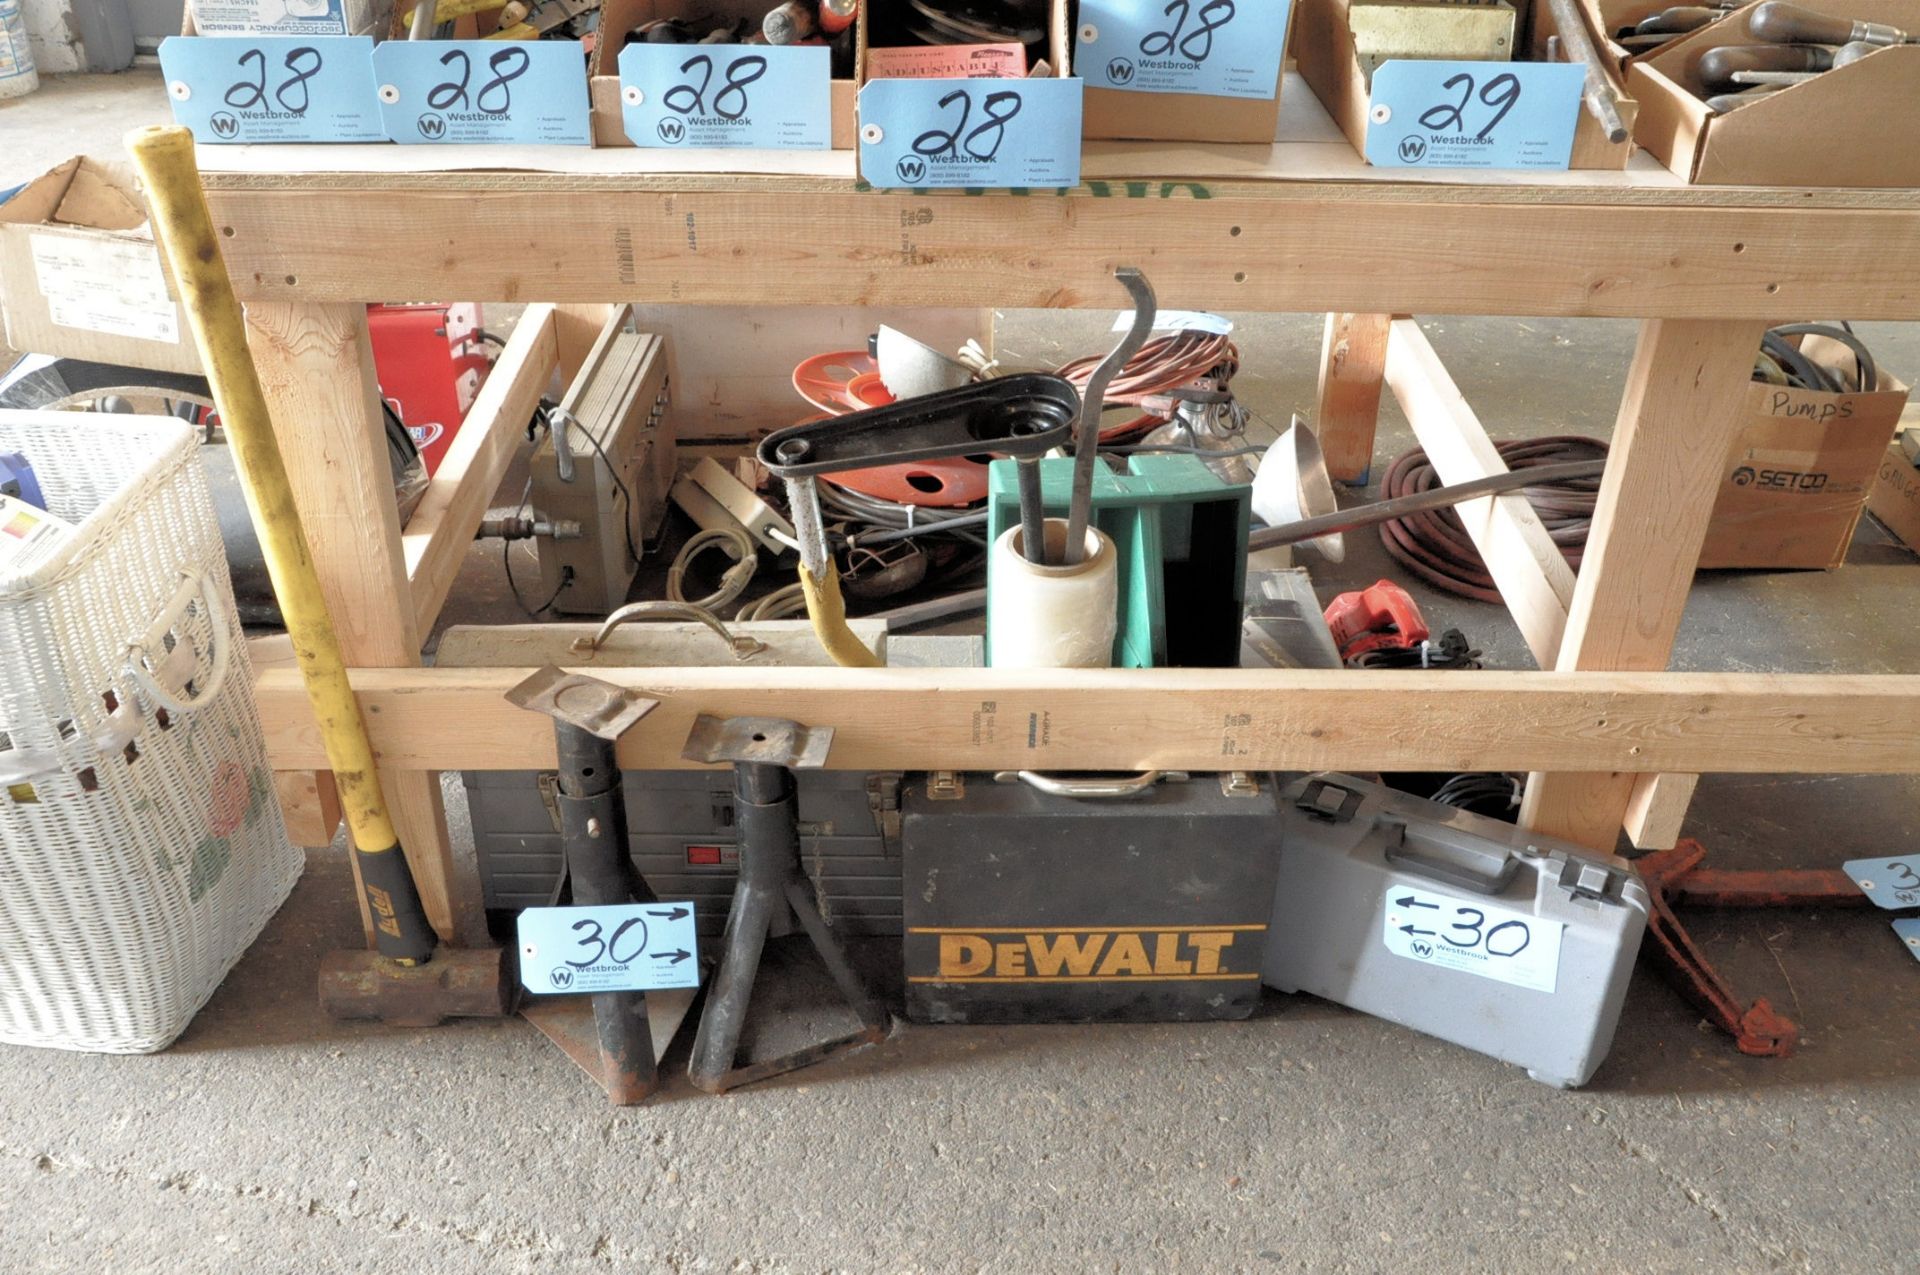 Lot-Tote Tool Boxes, Stretch Wrap, Sledge Hammer, Car Vac, and Jack Stands Under (1) Bench